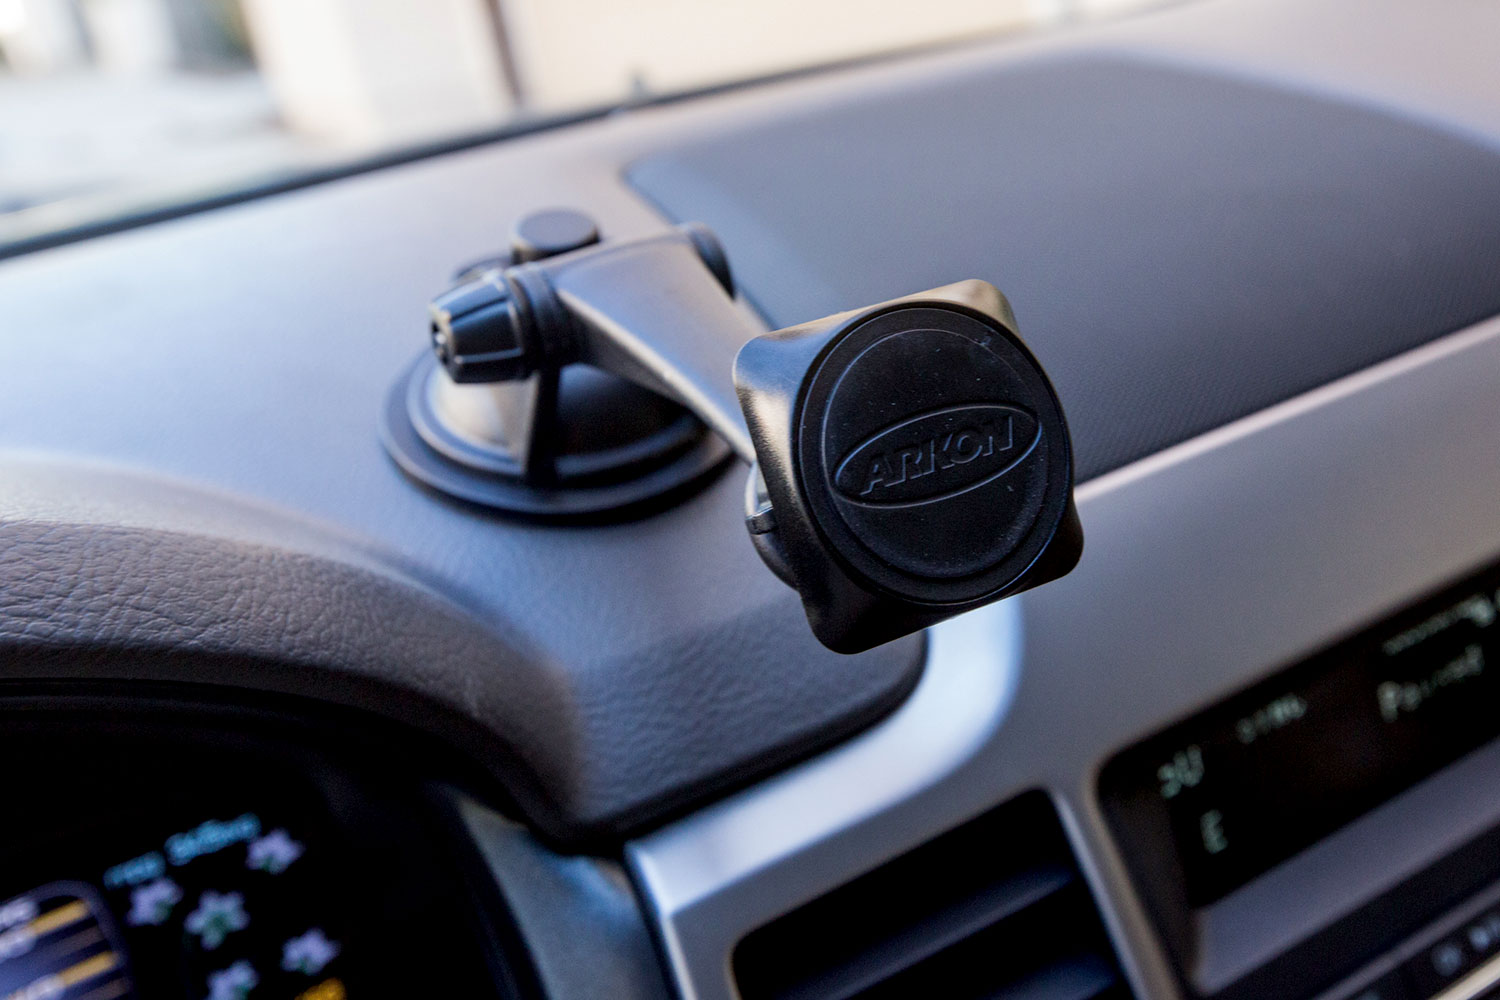 arkon automotive phone and tablet mounts hands on review mag179 magnetic sticky suction moun